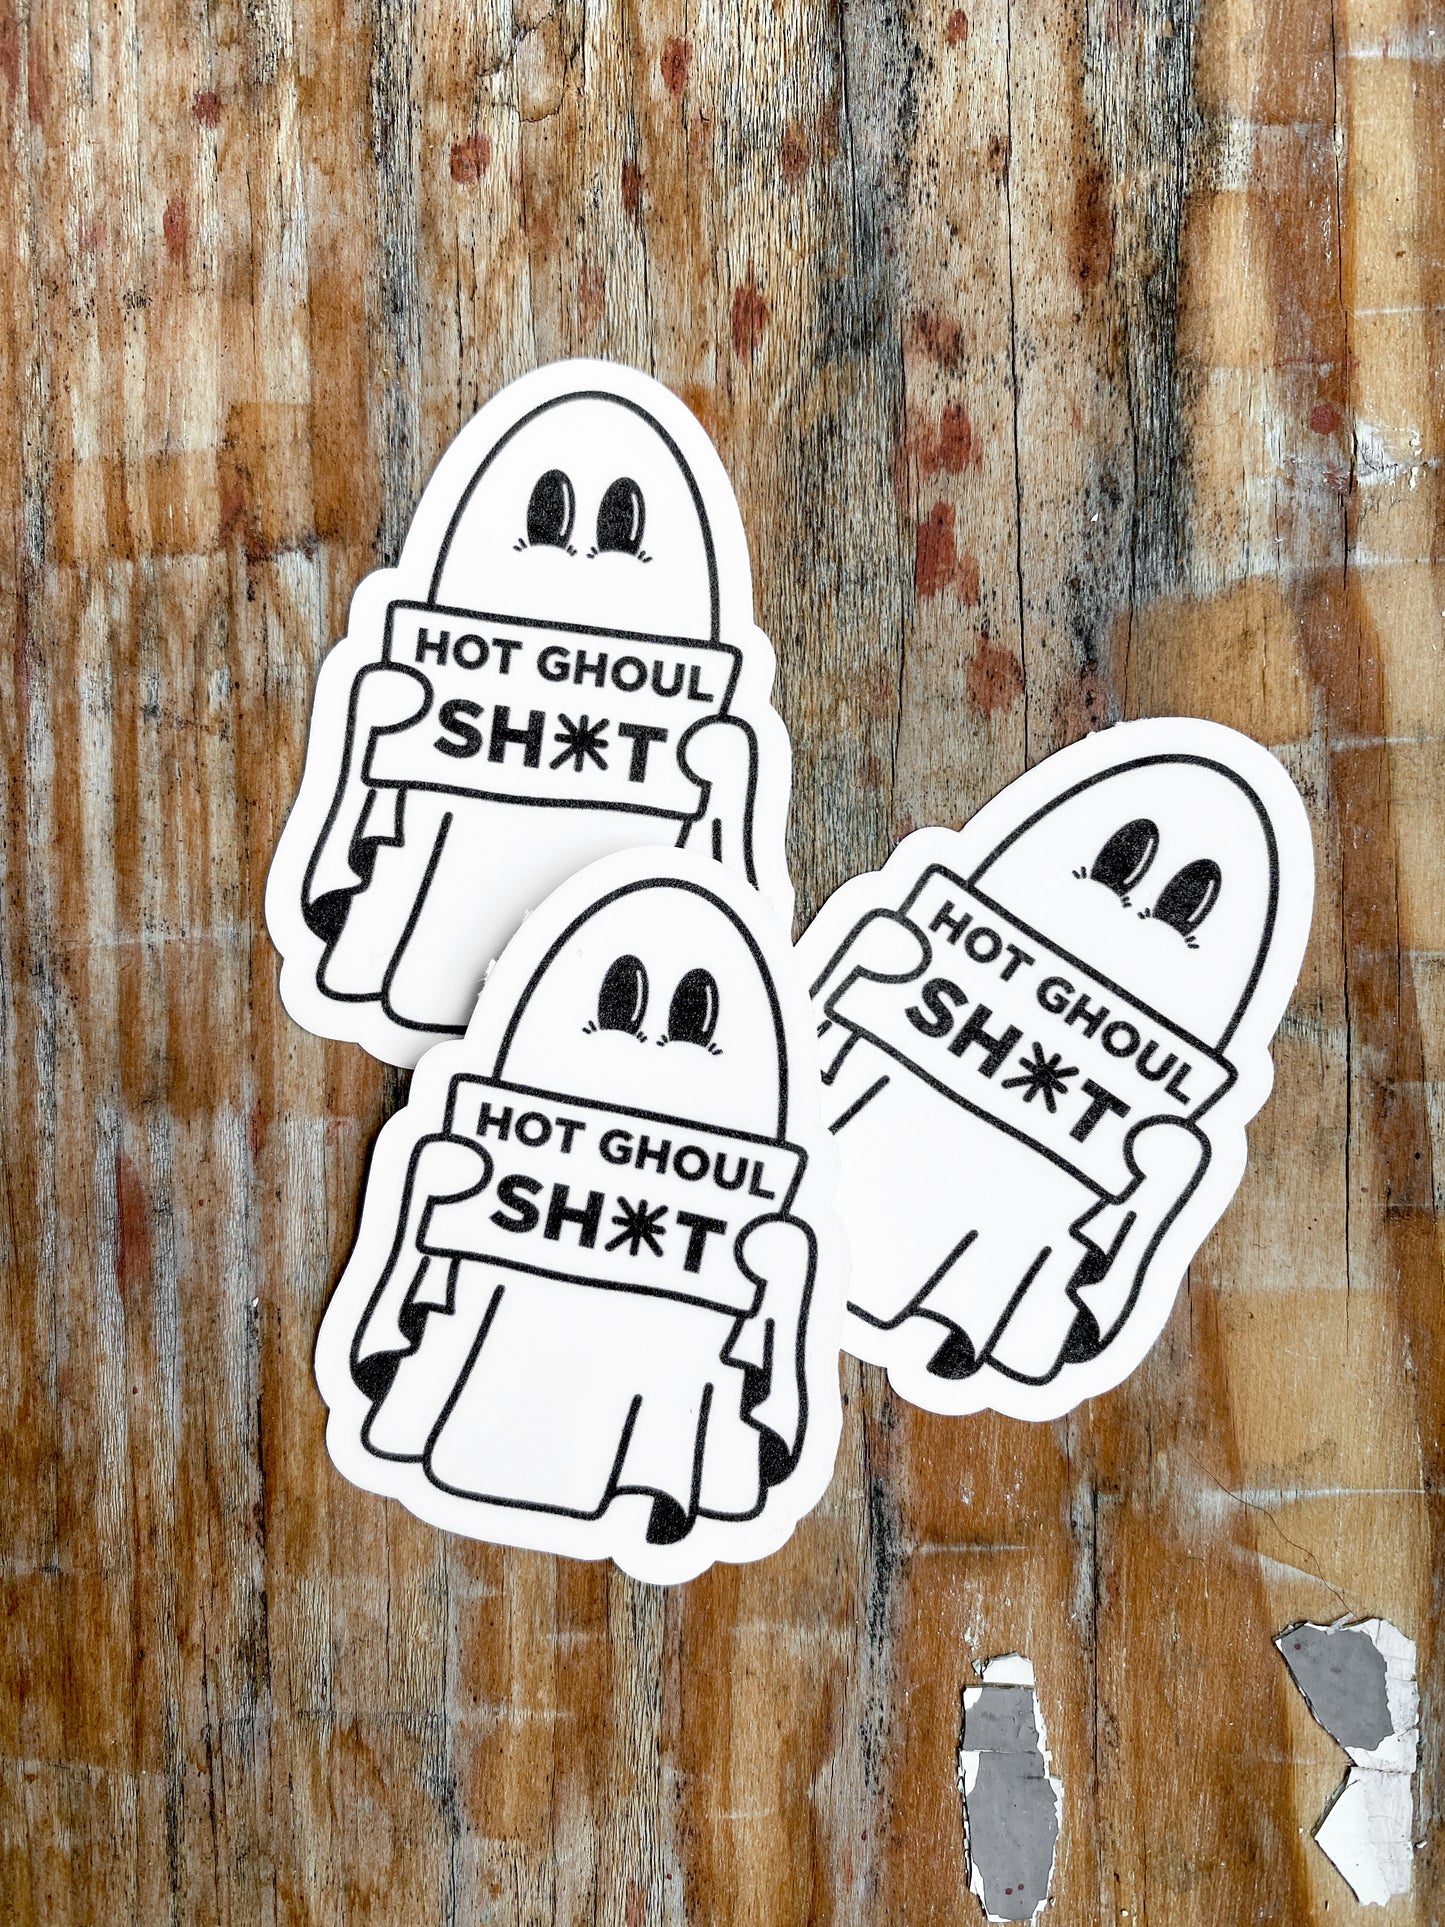 3 Hot Ghoul stickers of ghosts with big eyes holding sign that reads "hot ghoul sh*t'